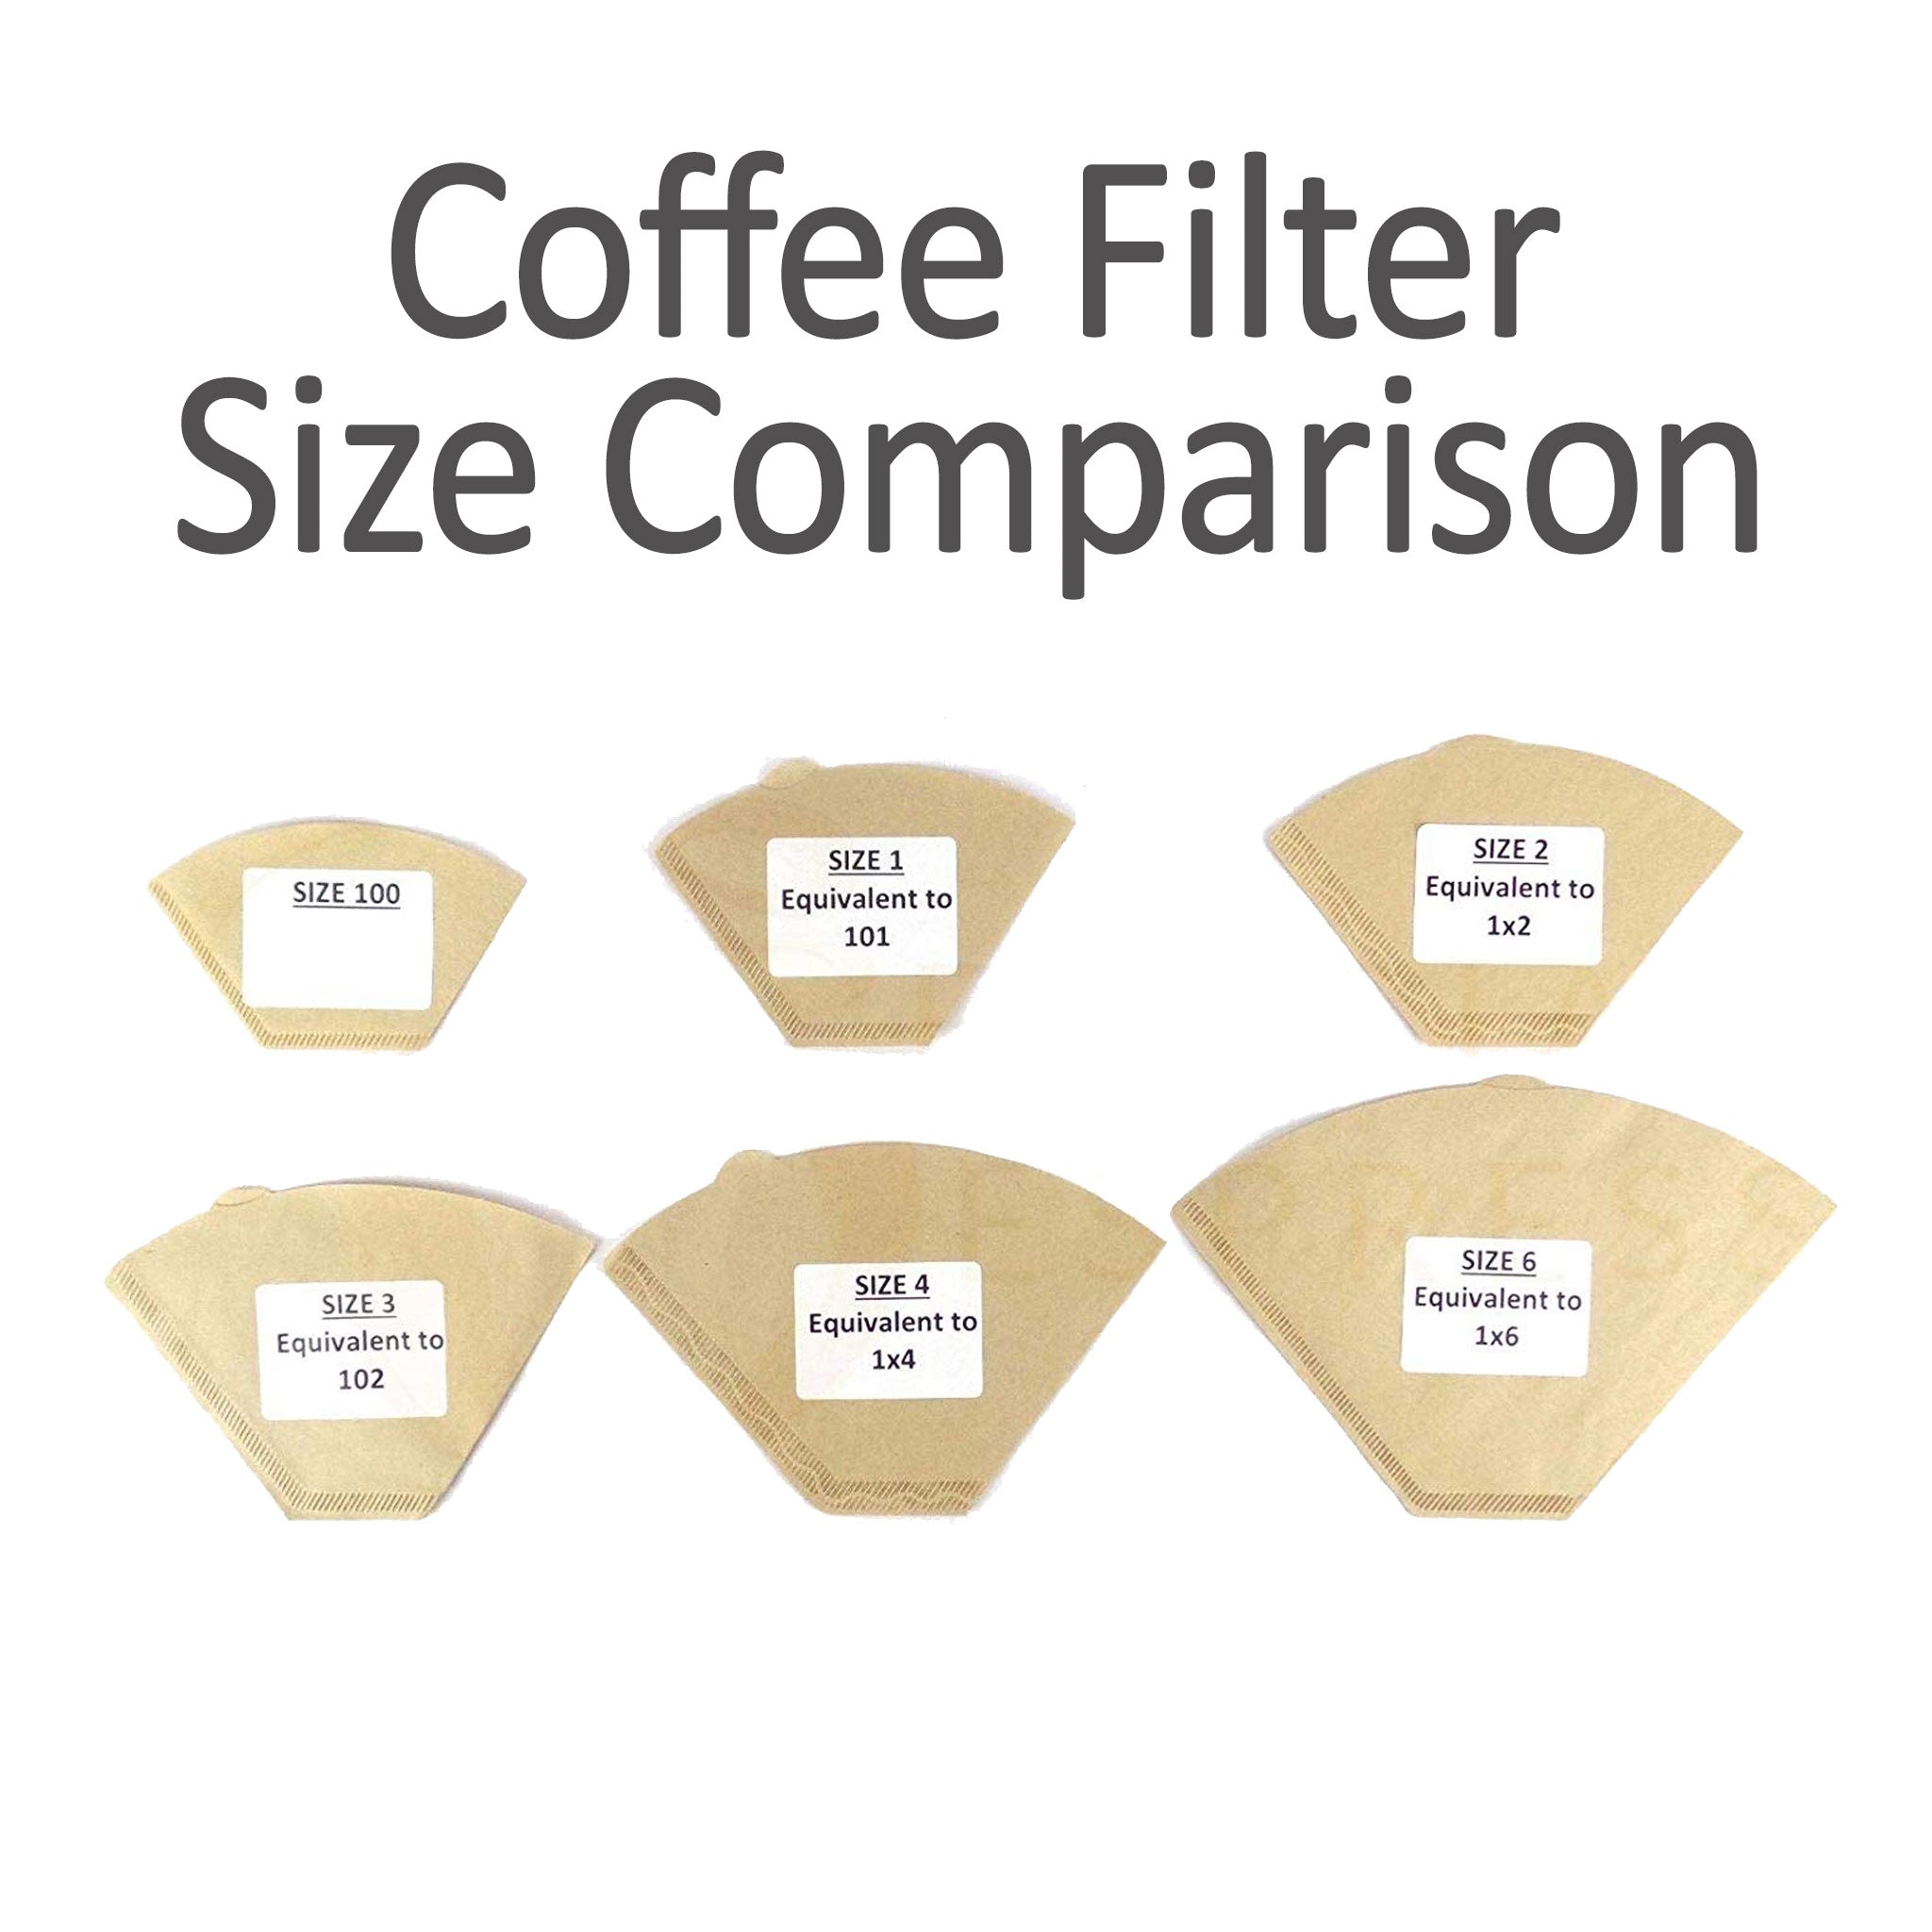 Coffee Filter Sizes Chart